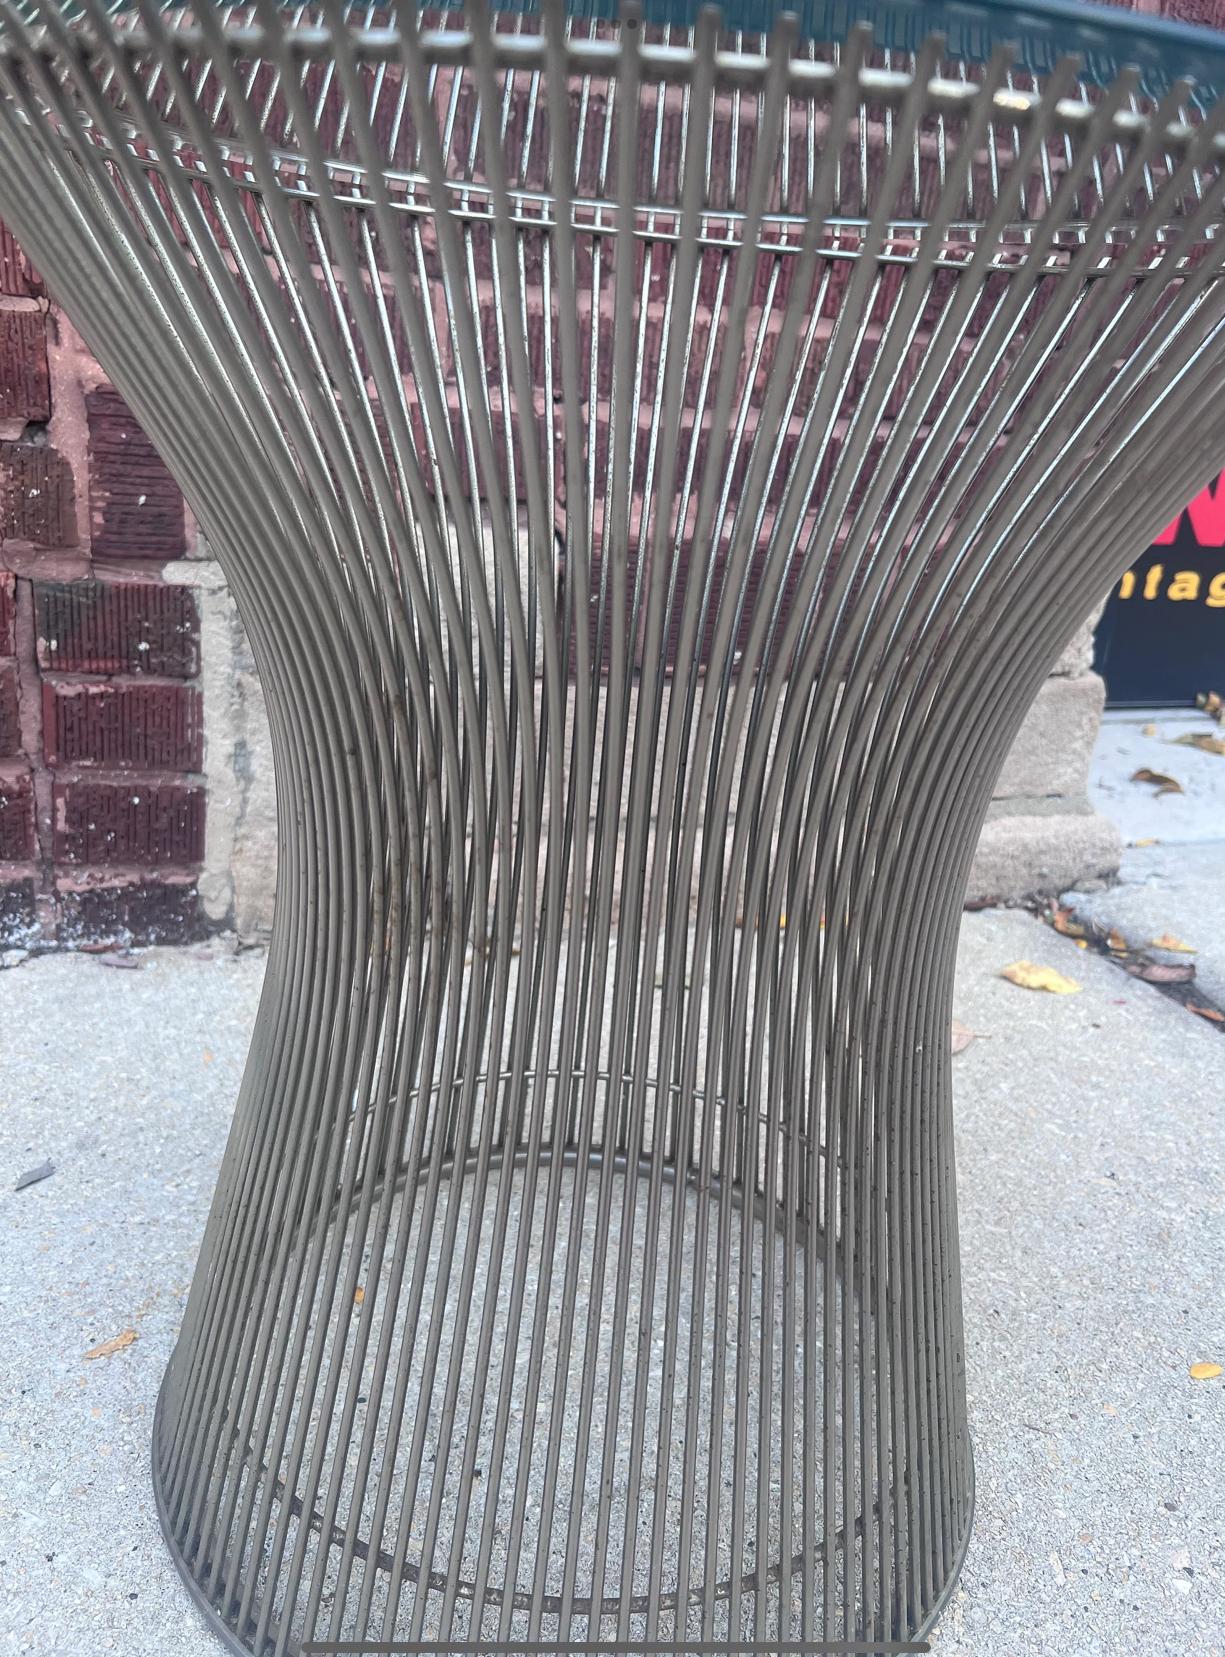 American Mid Century Modern Bent Wire Nickel Side Table by Warren Platner for Knoll For Sale